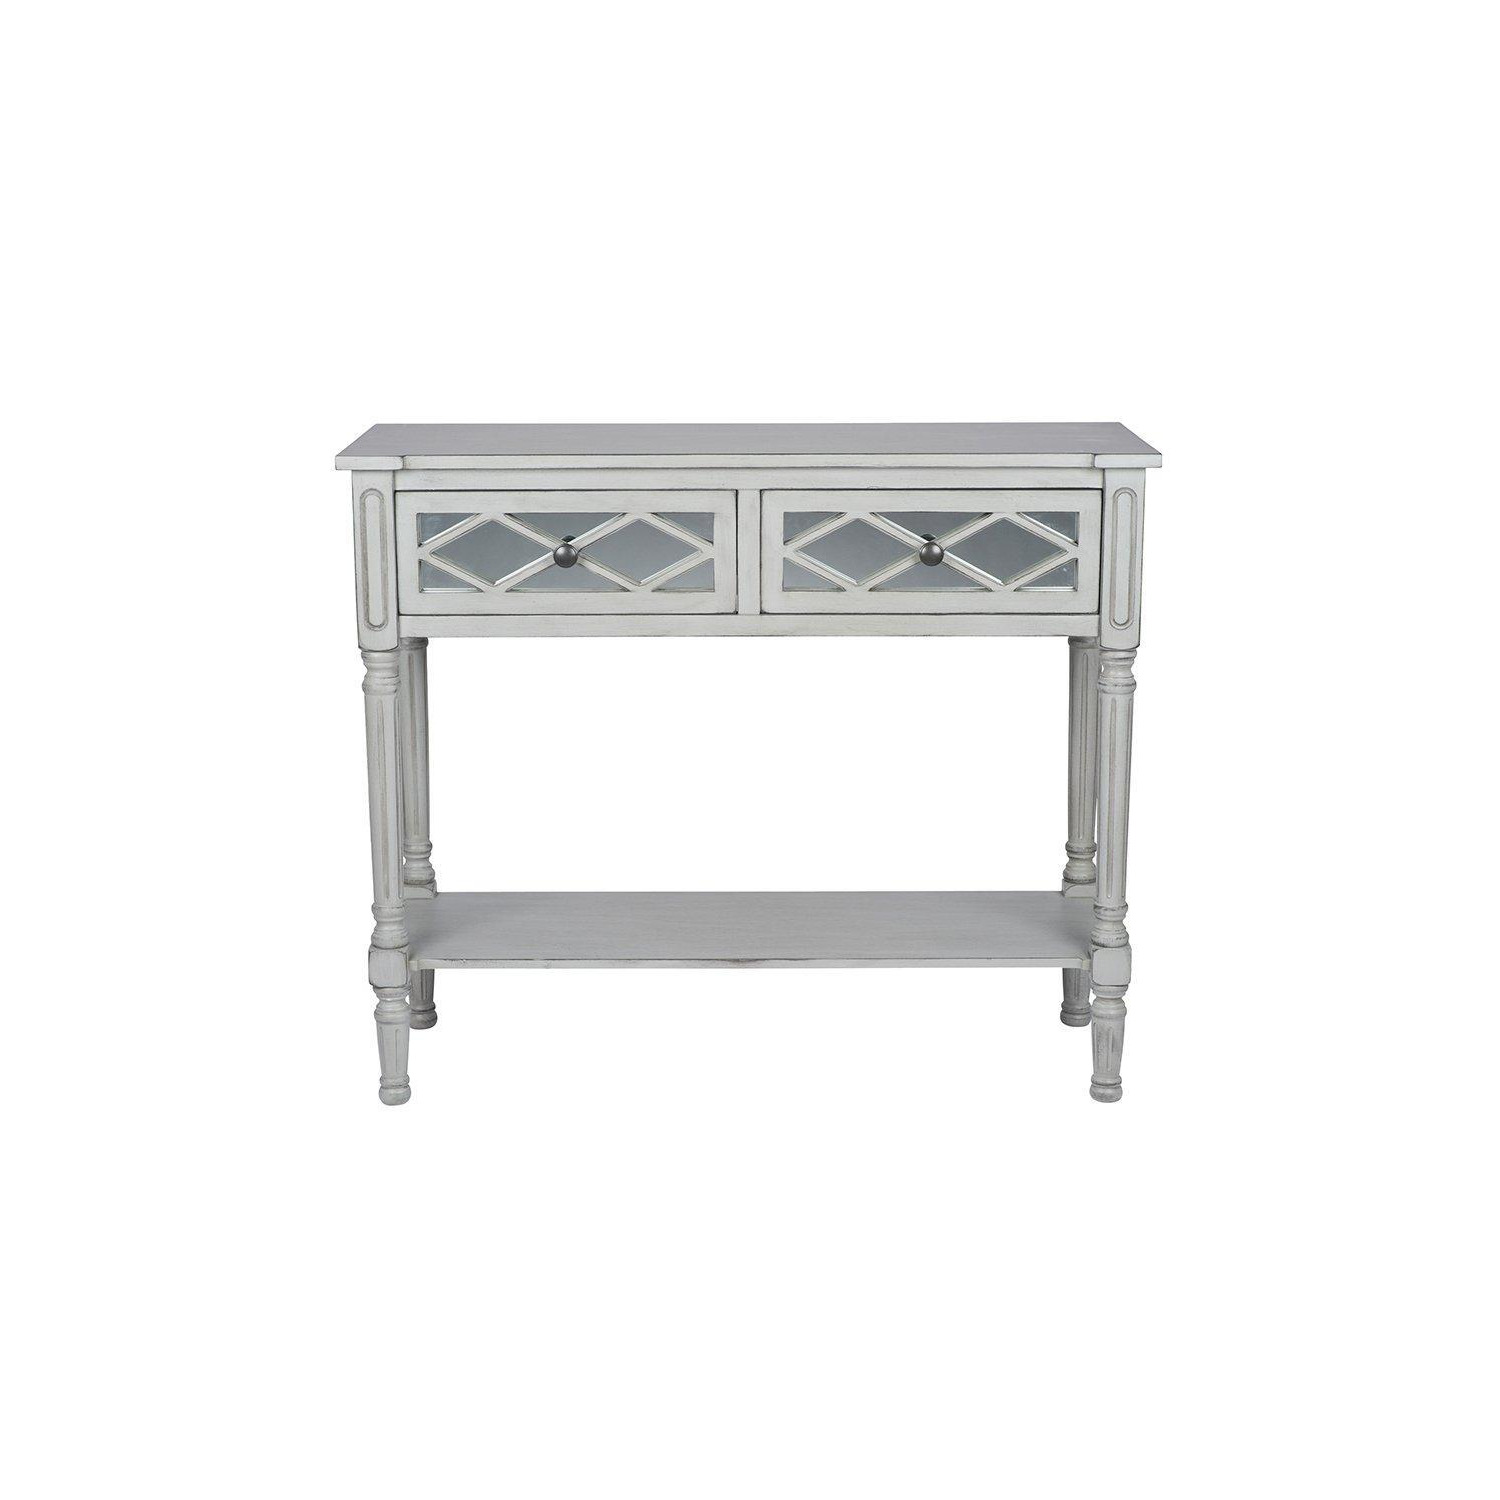 Olbia Dove Grey Mirrored Pine Wood Console Table - image 1